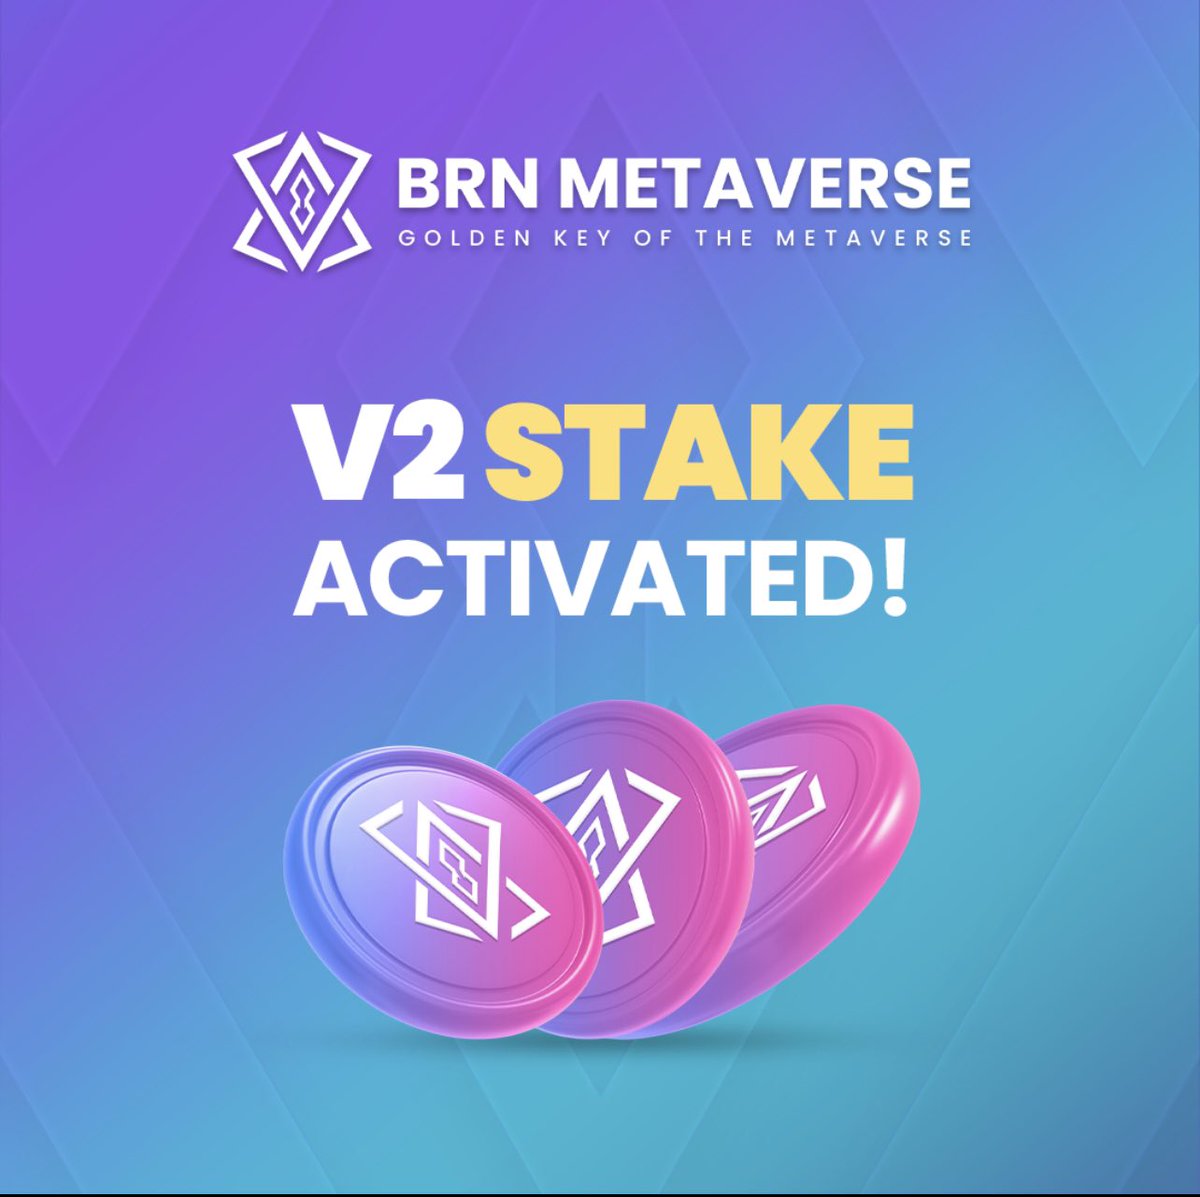 Dear investors, about V2 Stake ; Our V2 Staking system has been successfully integrated. You can make your stakes seamlessly from the 'Stake' area on brntoken.net. For more detailed information 'brntoken.net/article/stake-…'